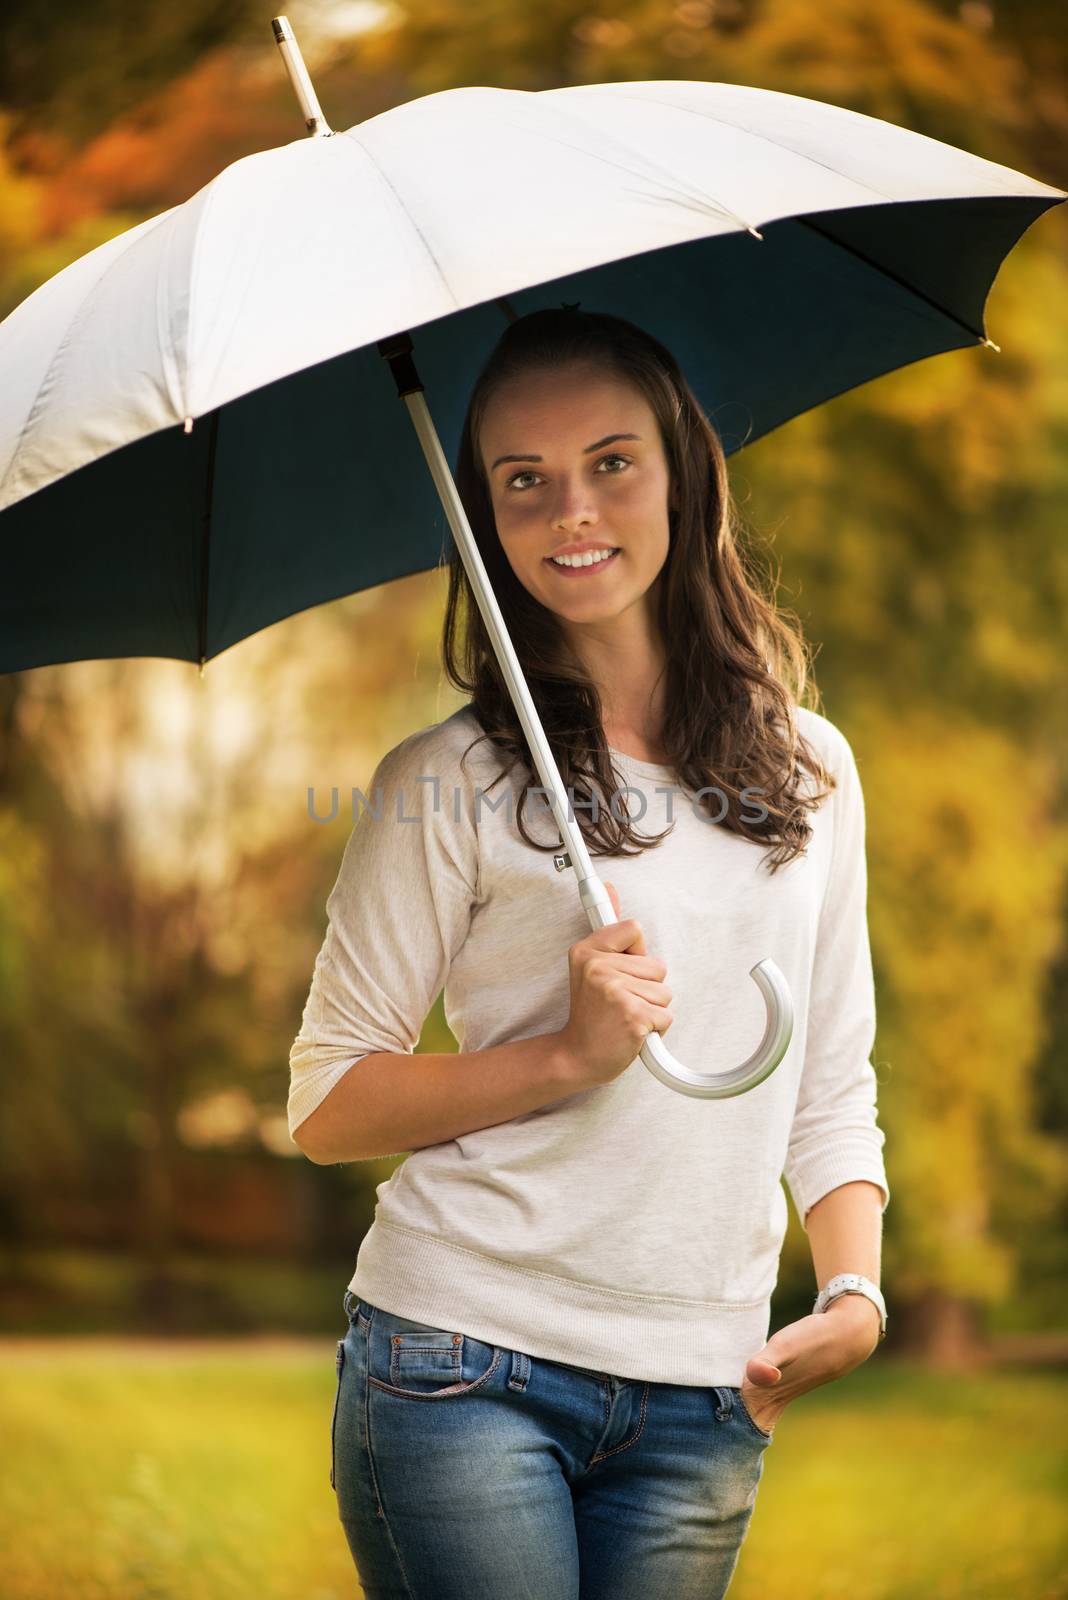 Young beautiful woman standing in rainy autumn park with umbrella.